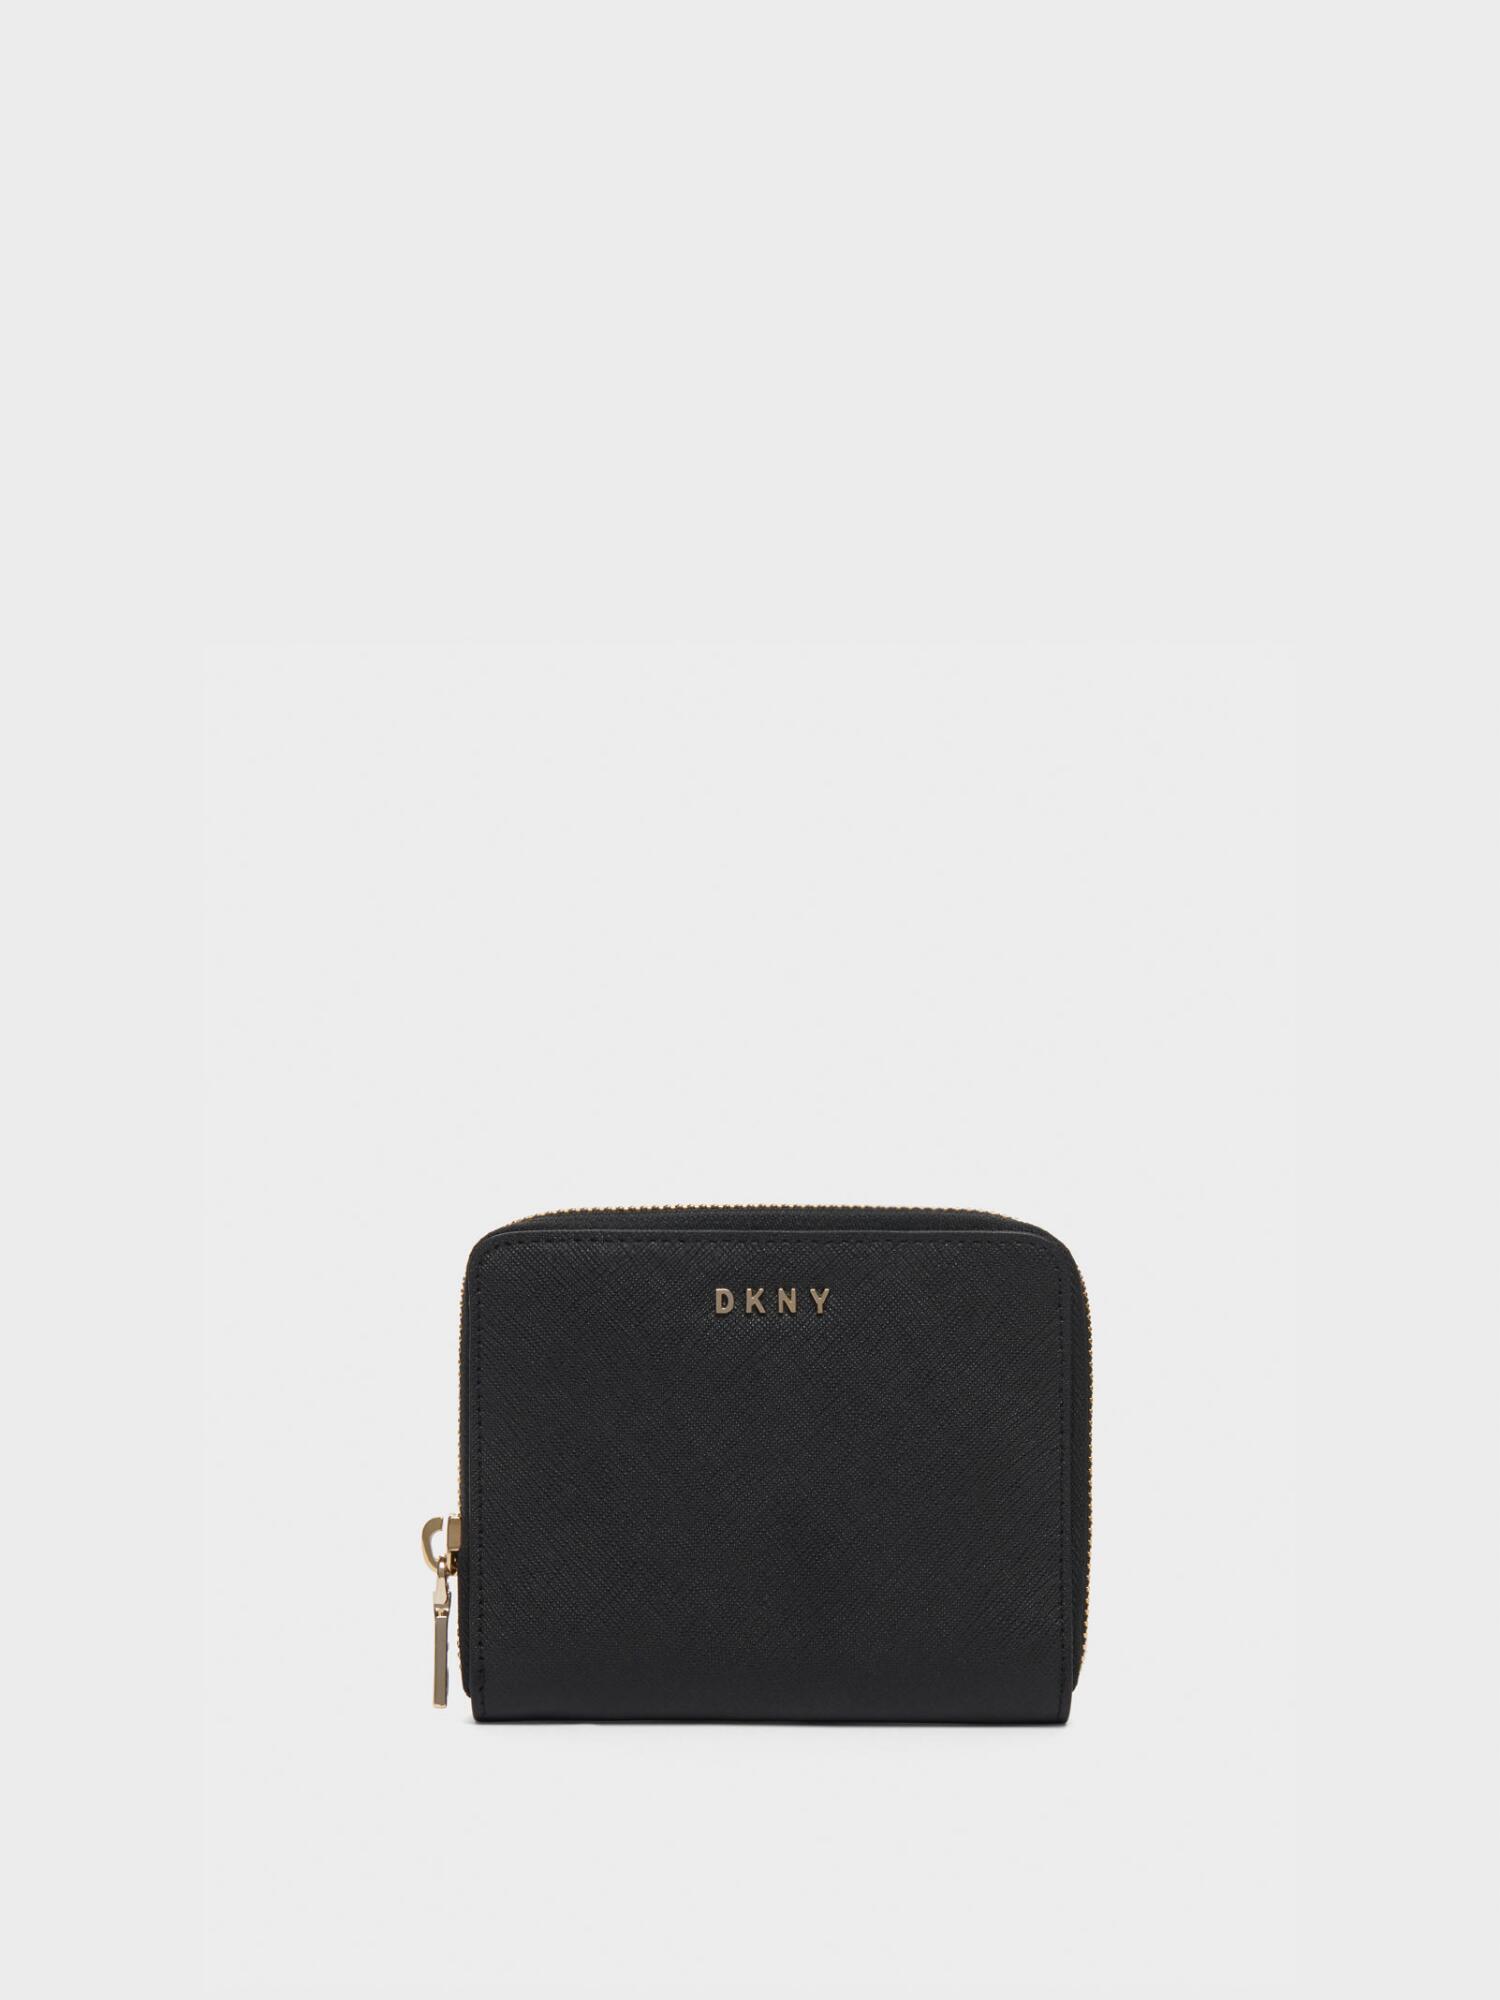 DKNY Bryant Small Leather Zip-around Wallet in Black - Lyst